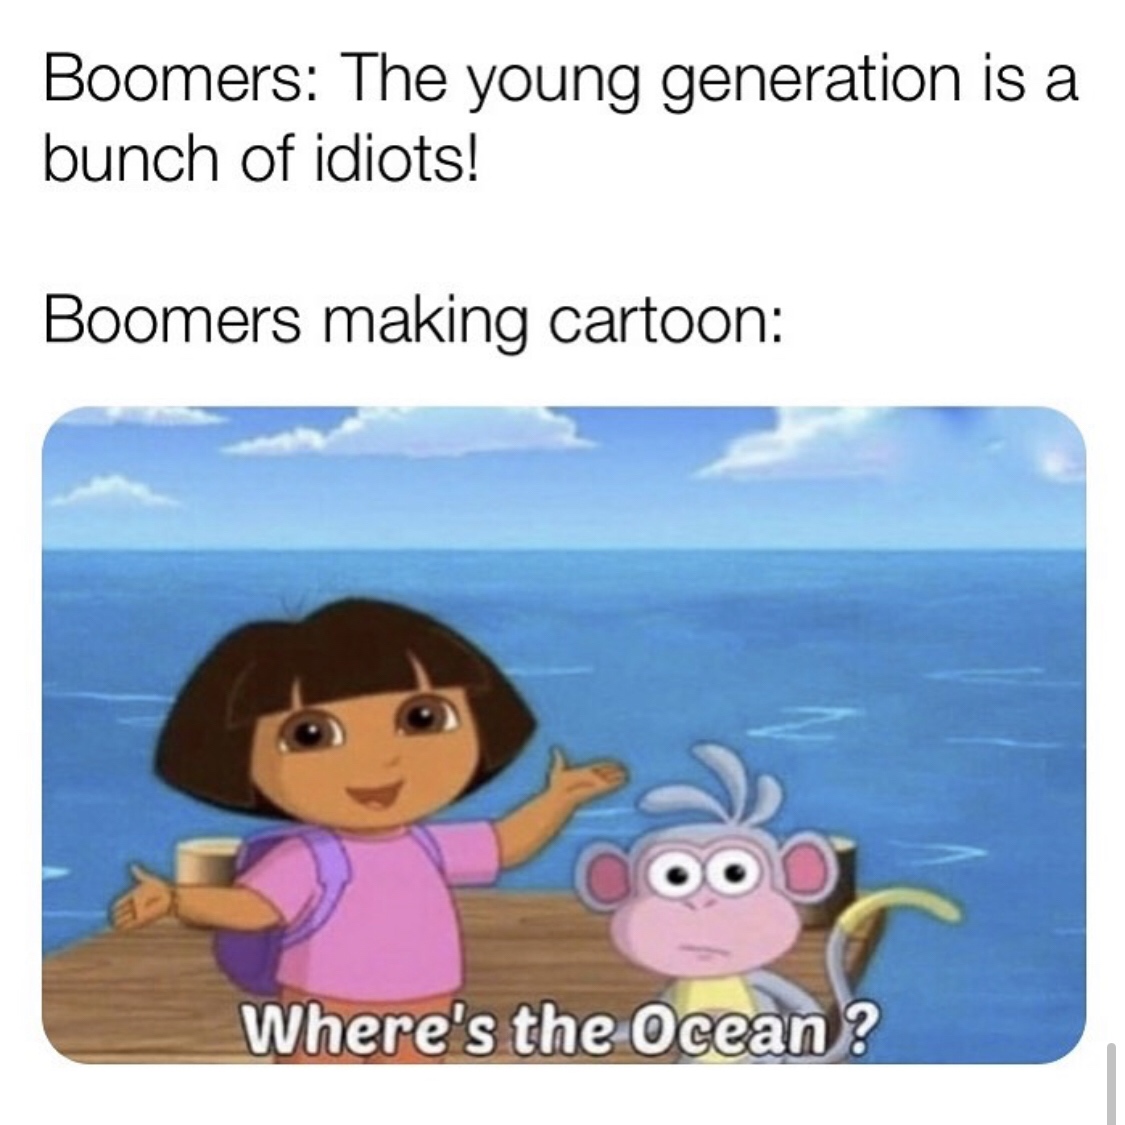 Dora the Explorer - Boomers The young generation is a bunch of idiots! Boomers making cartoon Ood Where's the ocean?